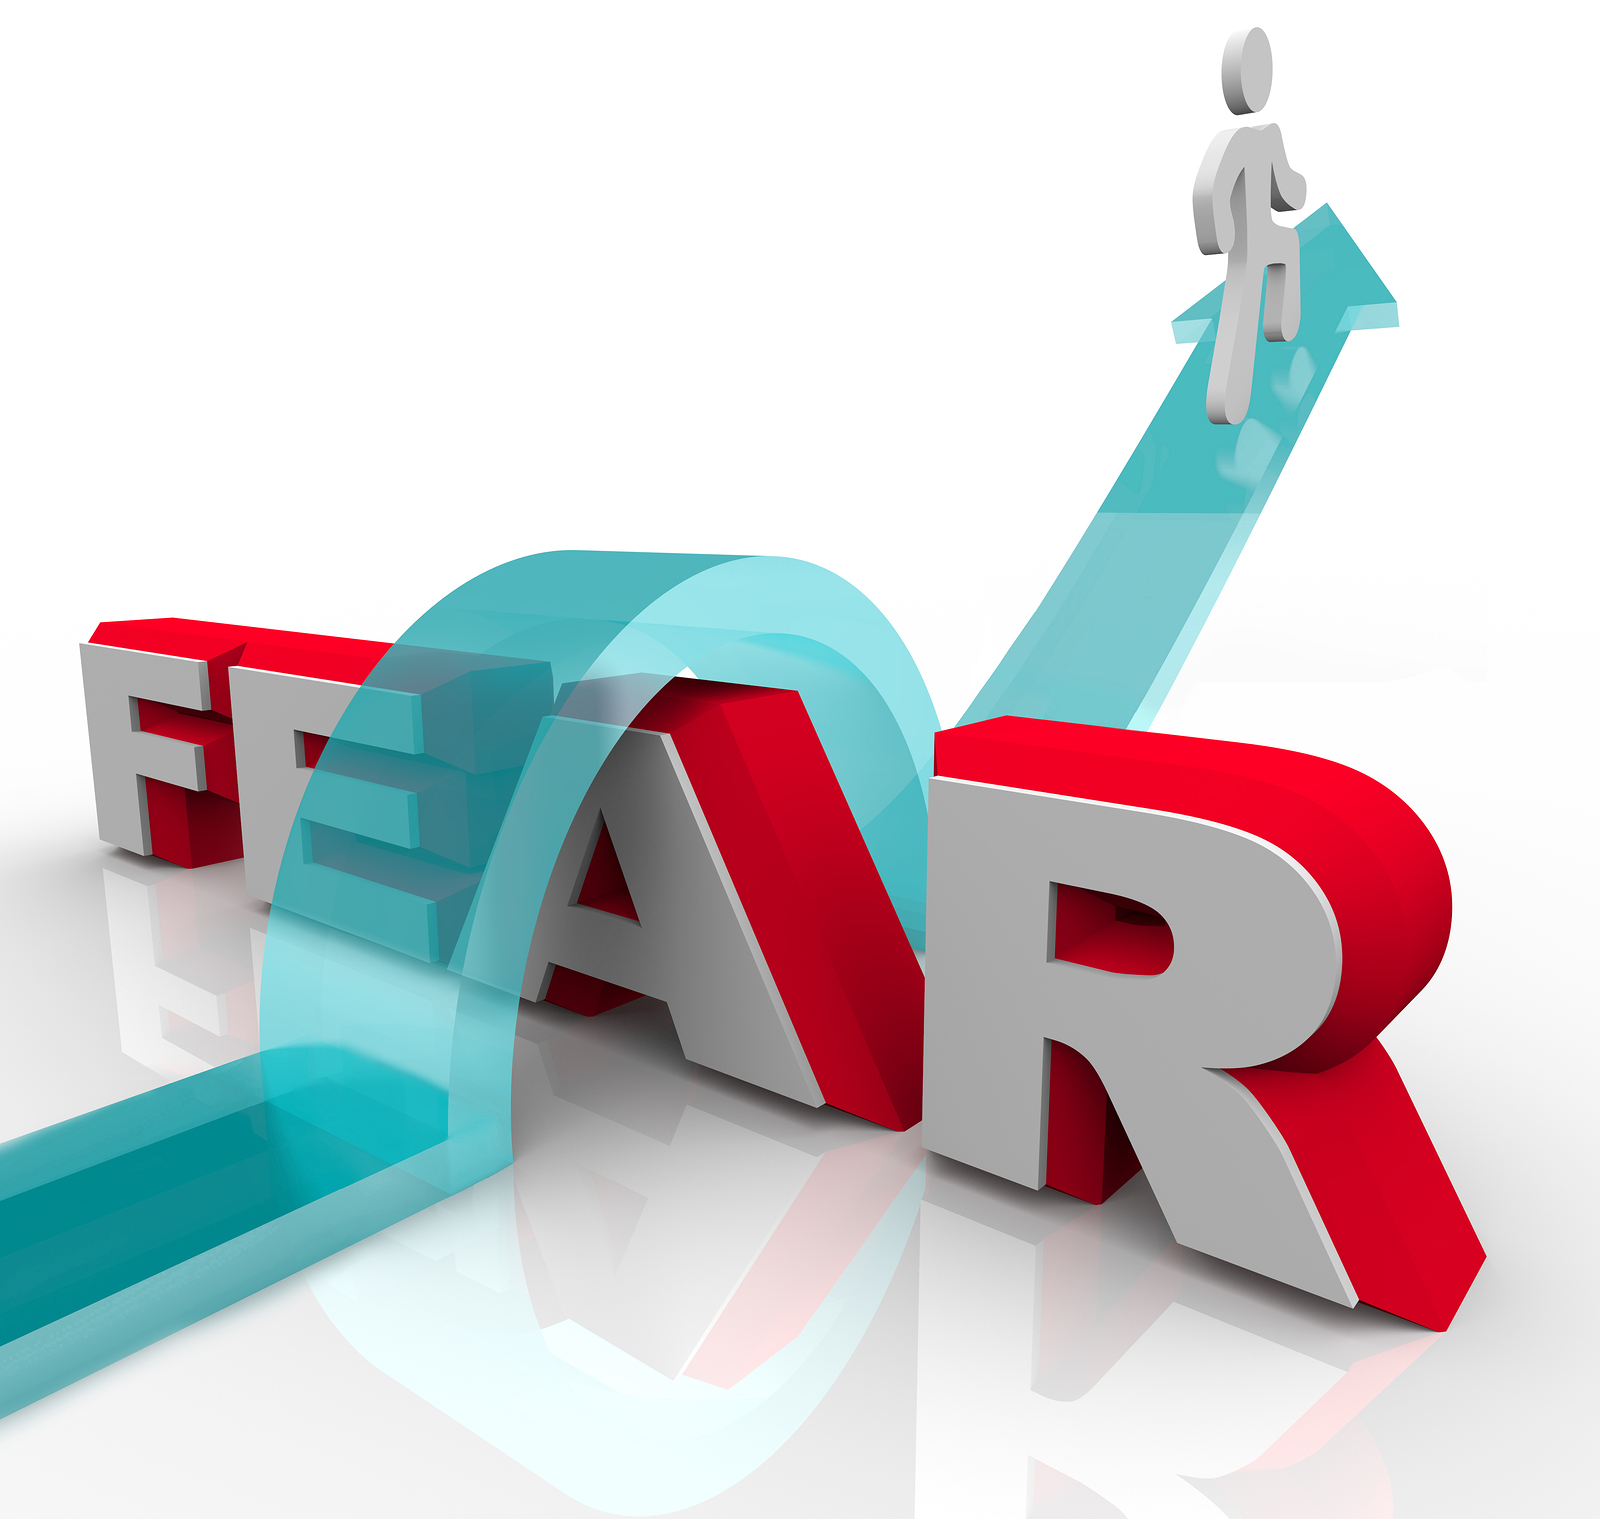 Using Systems to Conquer Fear